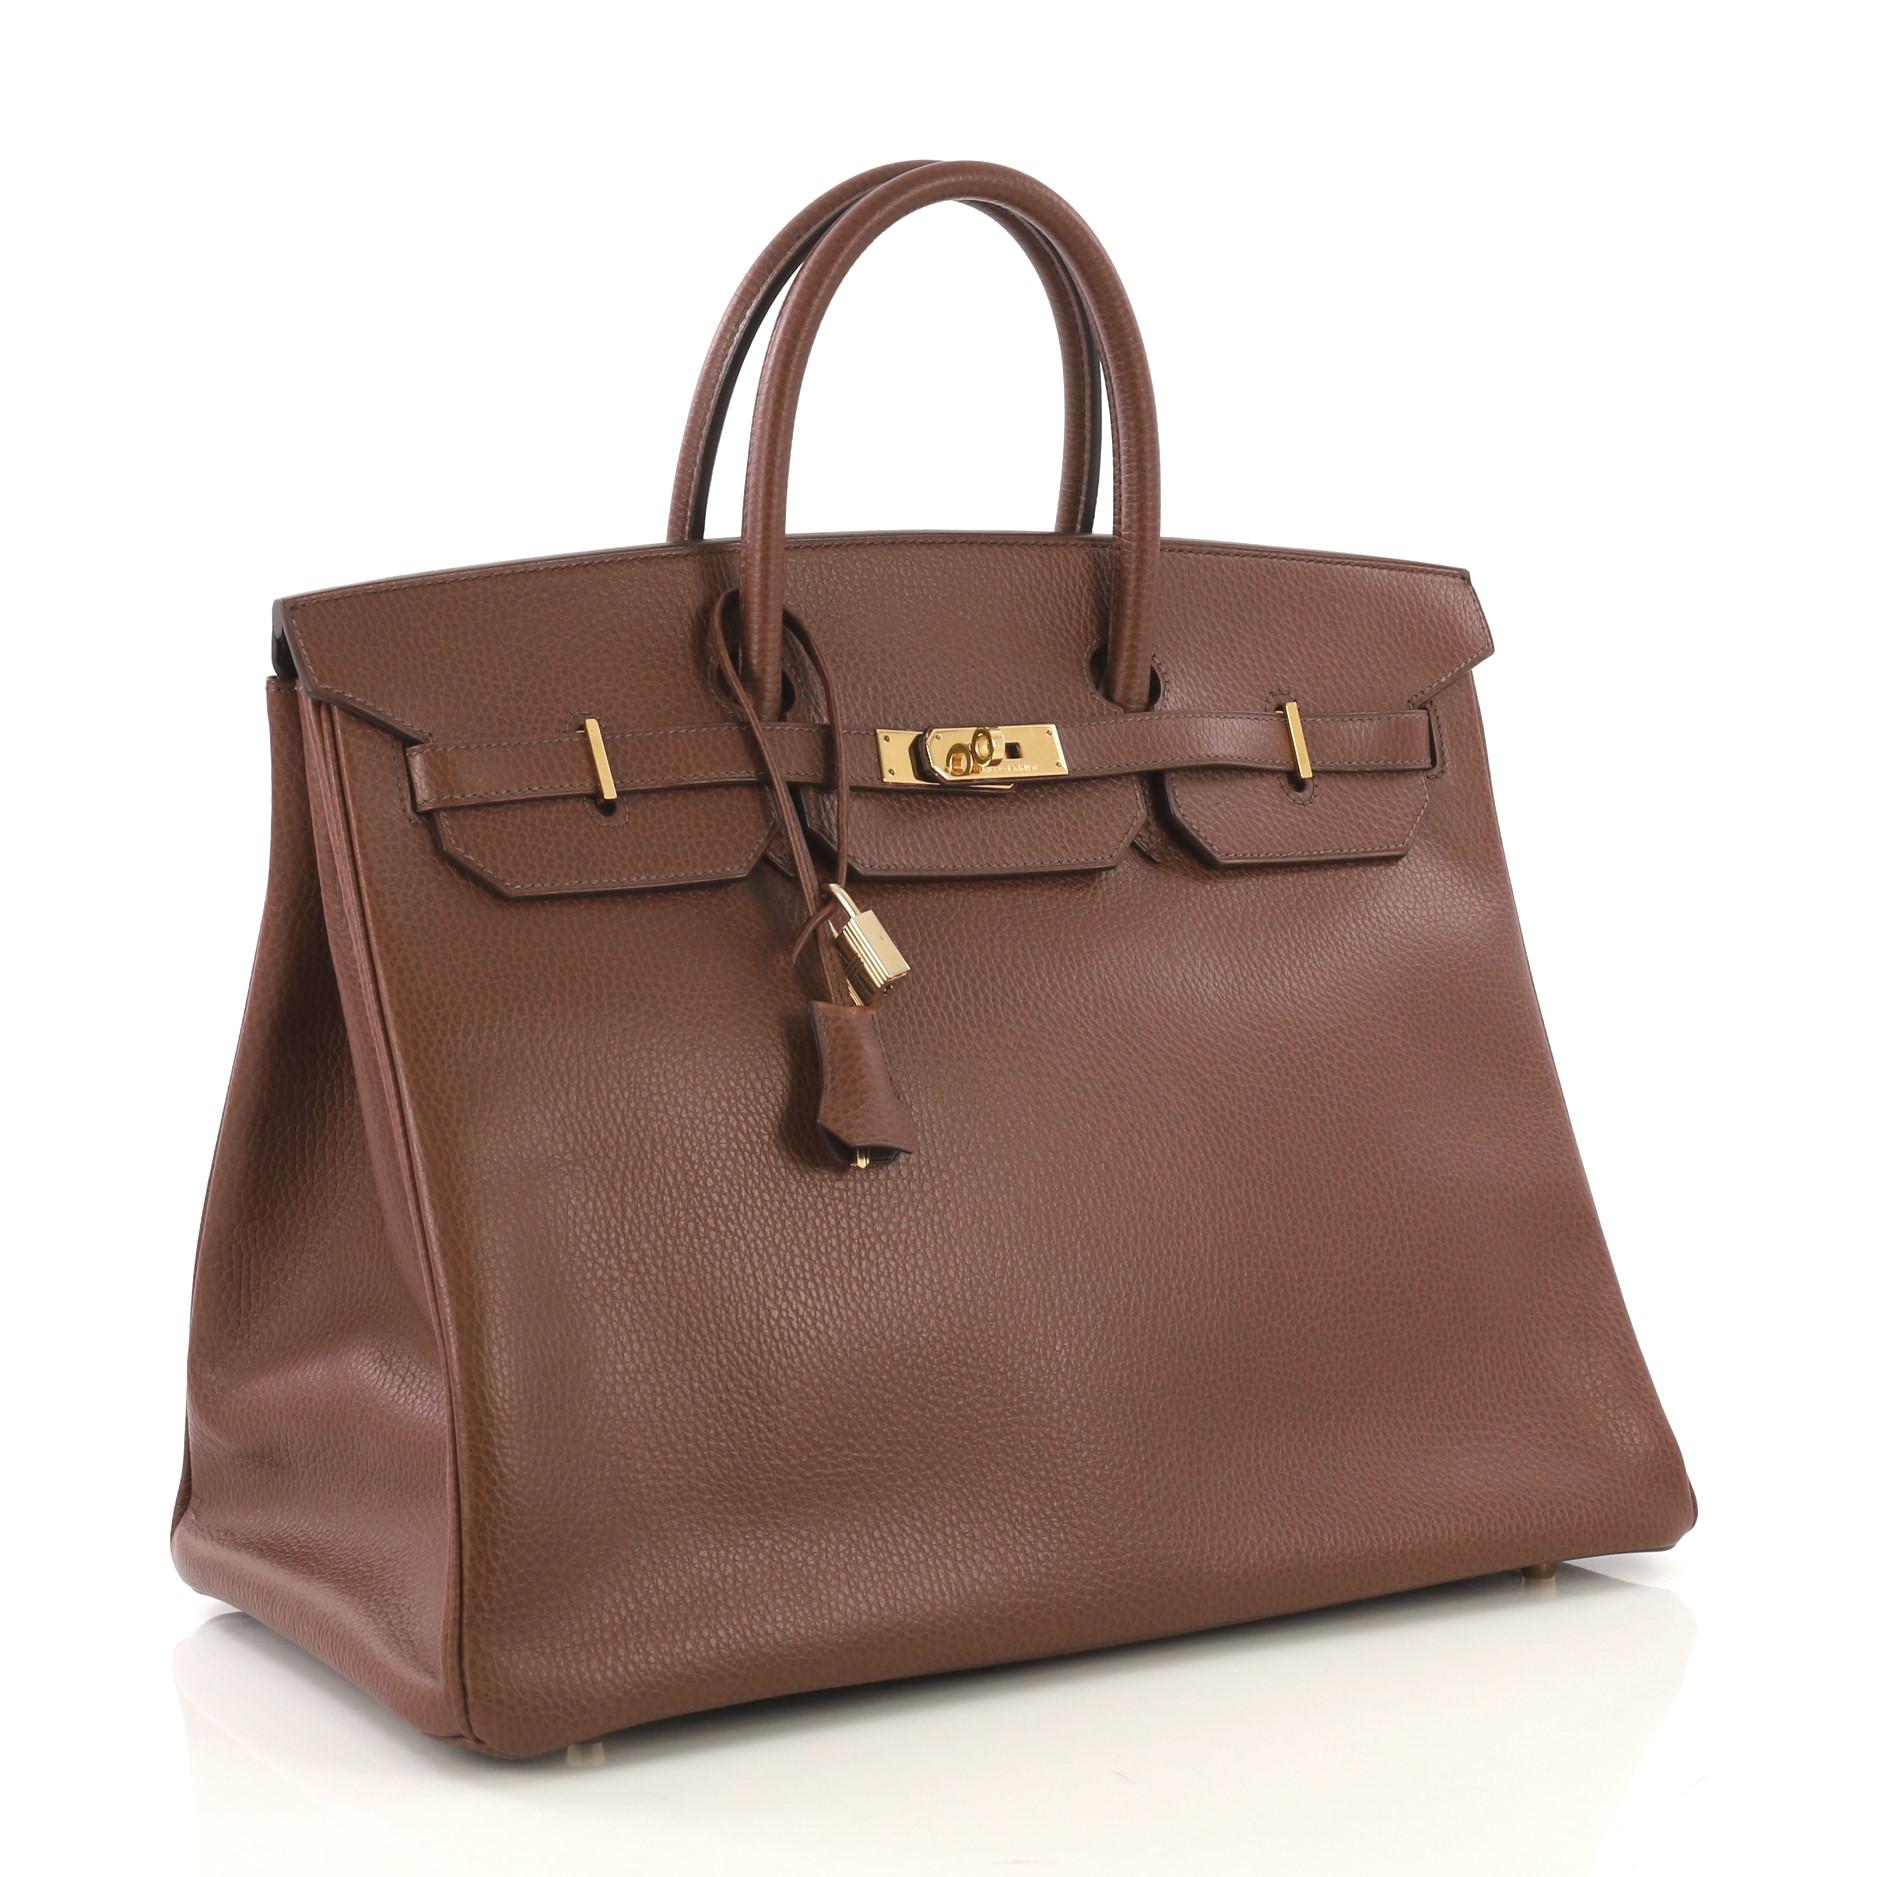 This Hermes Birkin Handbag Marron Fonce Ardennes with Gold Hardware 40, crafted in Marron Fonce brown Ardennes leather, features dual rolled handles, frontal flap, and gold hardware. Its turn-lock closure opens to a Marron Fonce brown Chevre leather